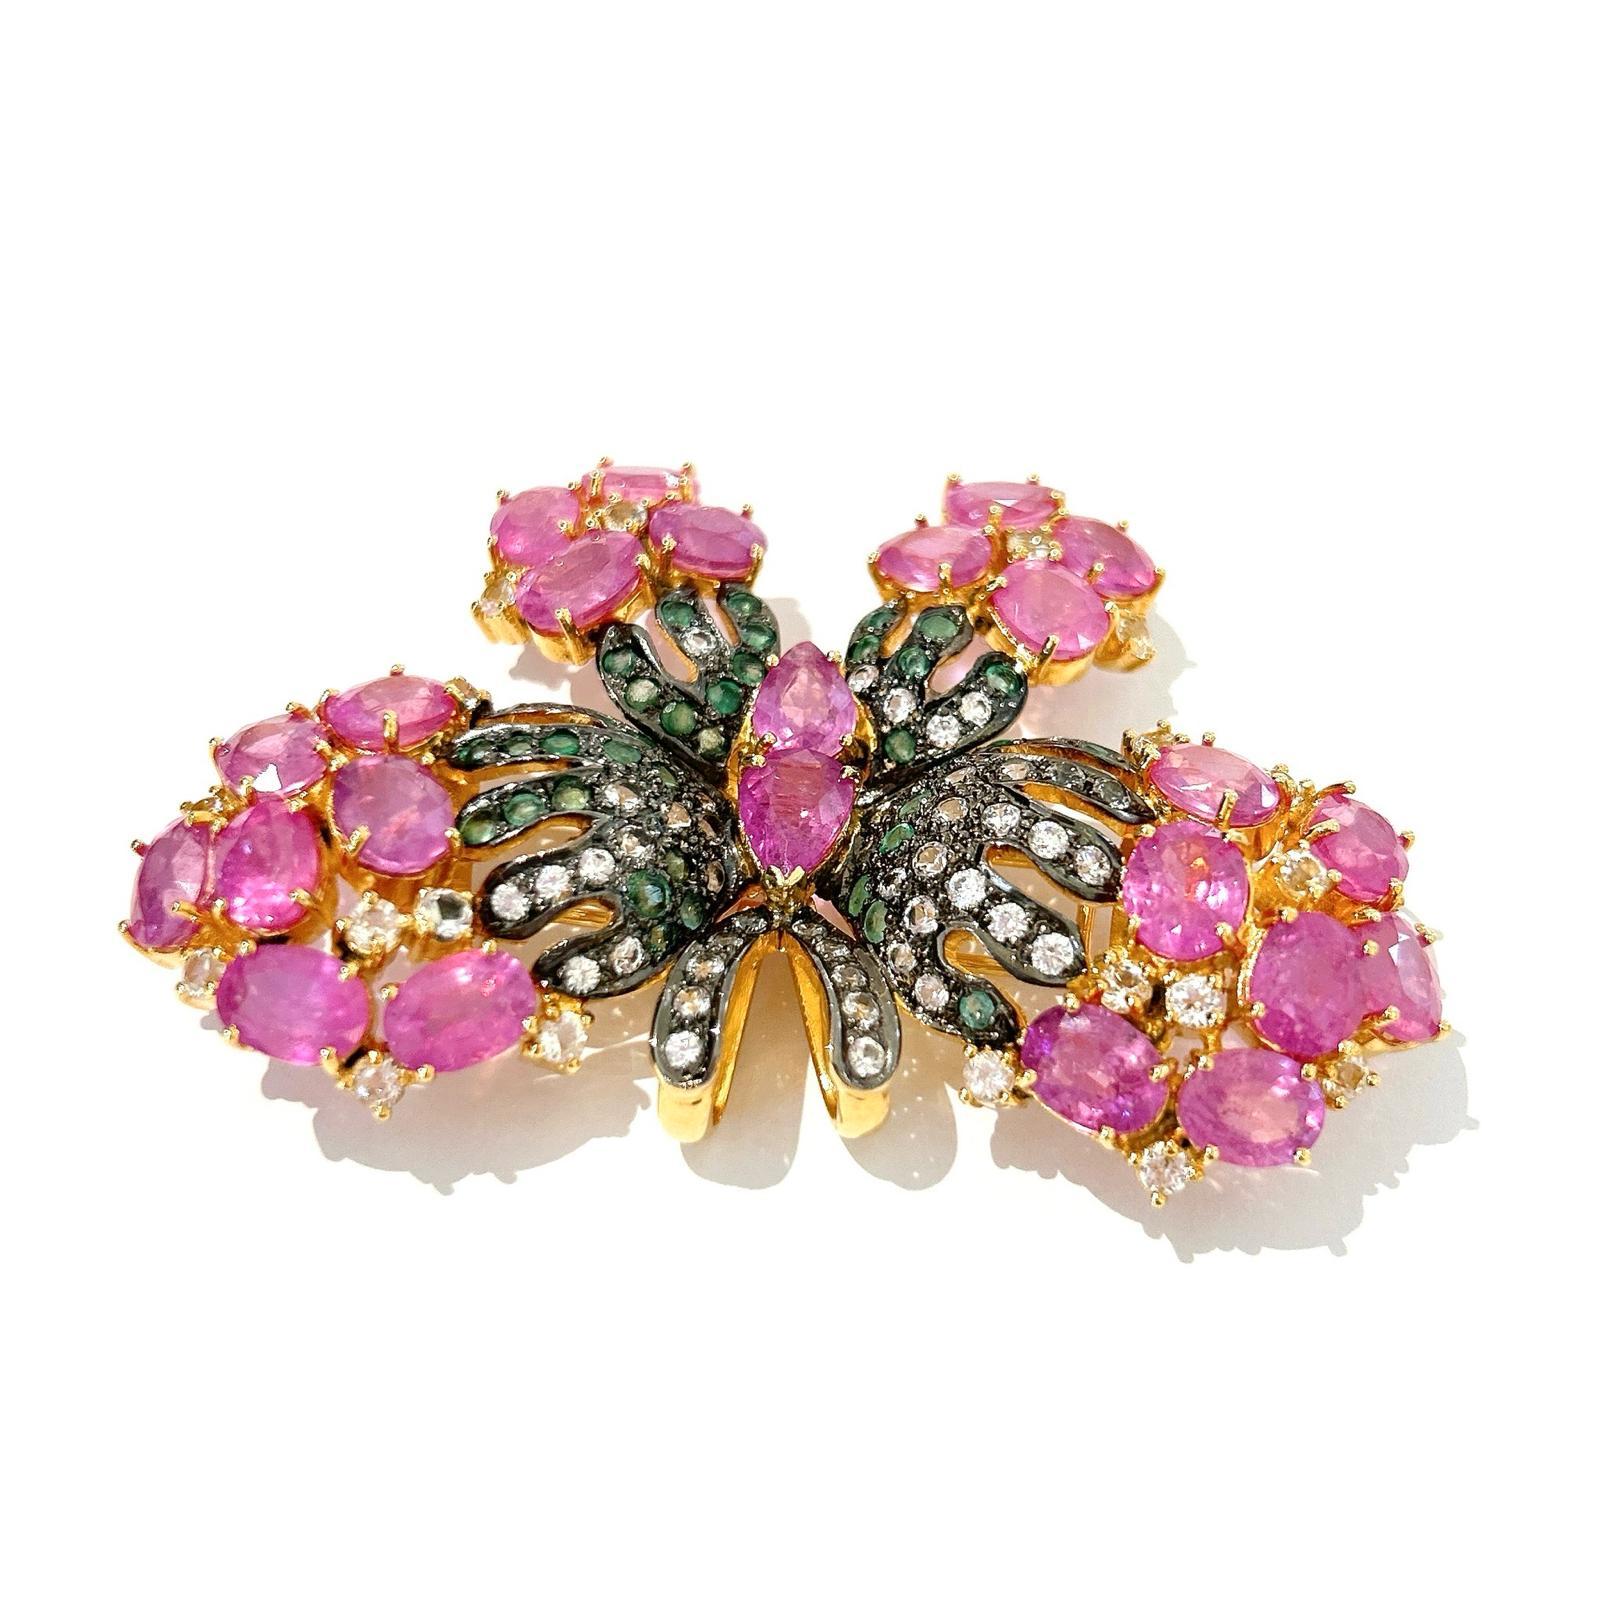 Stunning Bochic “Orient” Multi Sapphires & Ruby Brooch Set In 18K Gold & Silver  For Sale 1